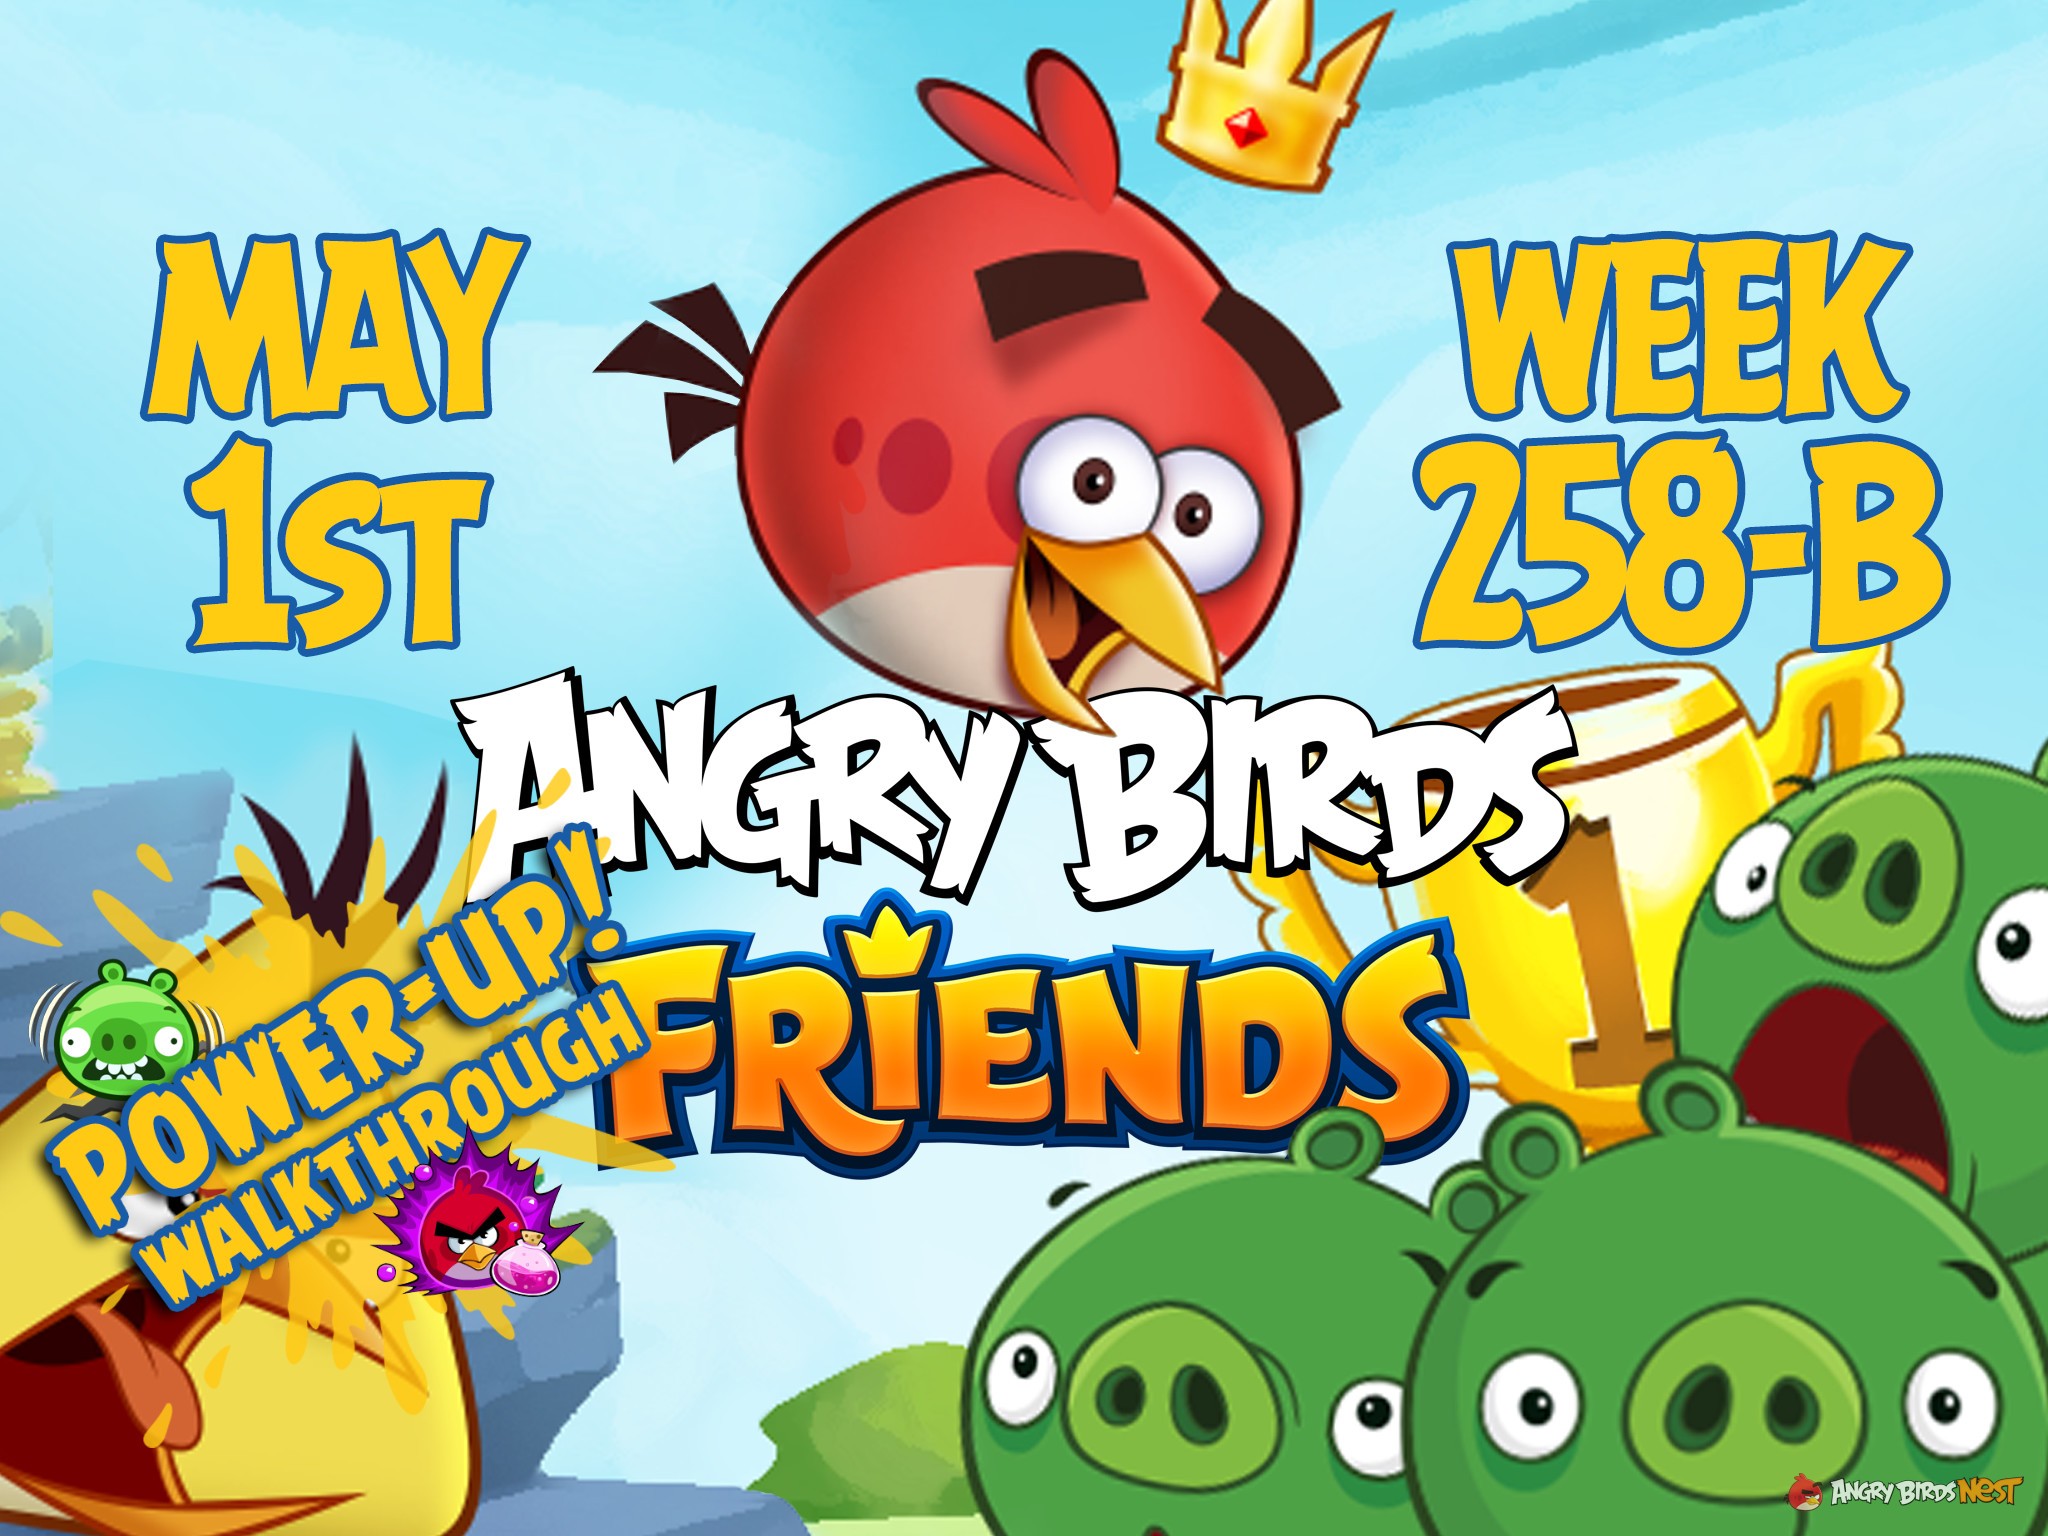 Angry Birds Friends Tournament Week 258-B Feature Image PU